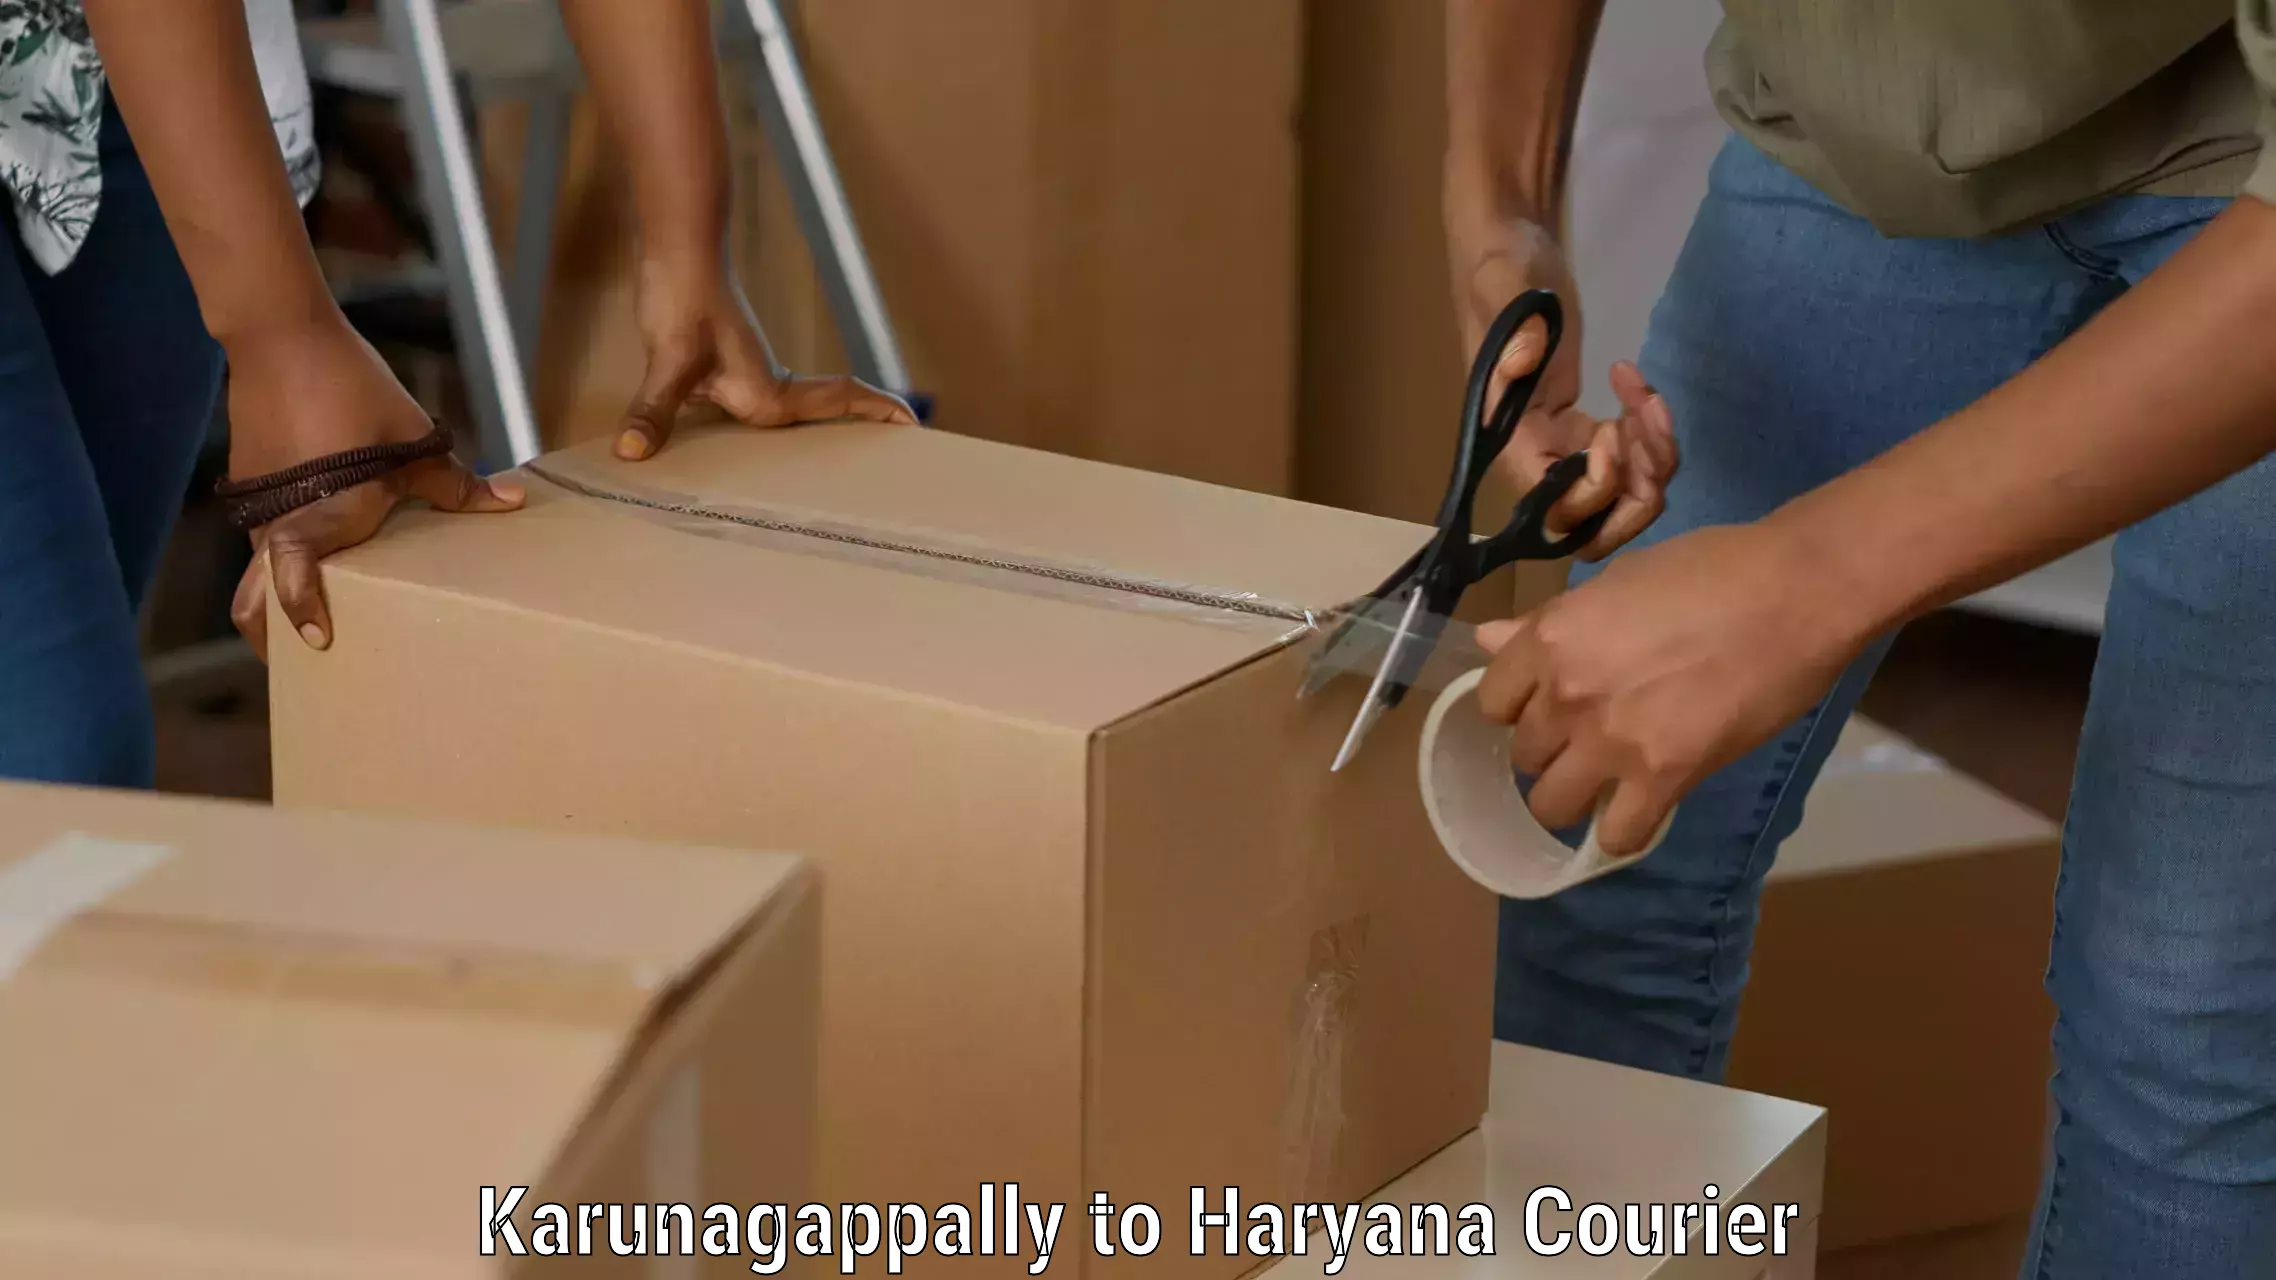 Package delivery network Karunagappally to Haryana